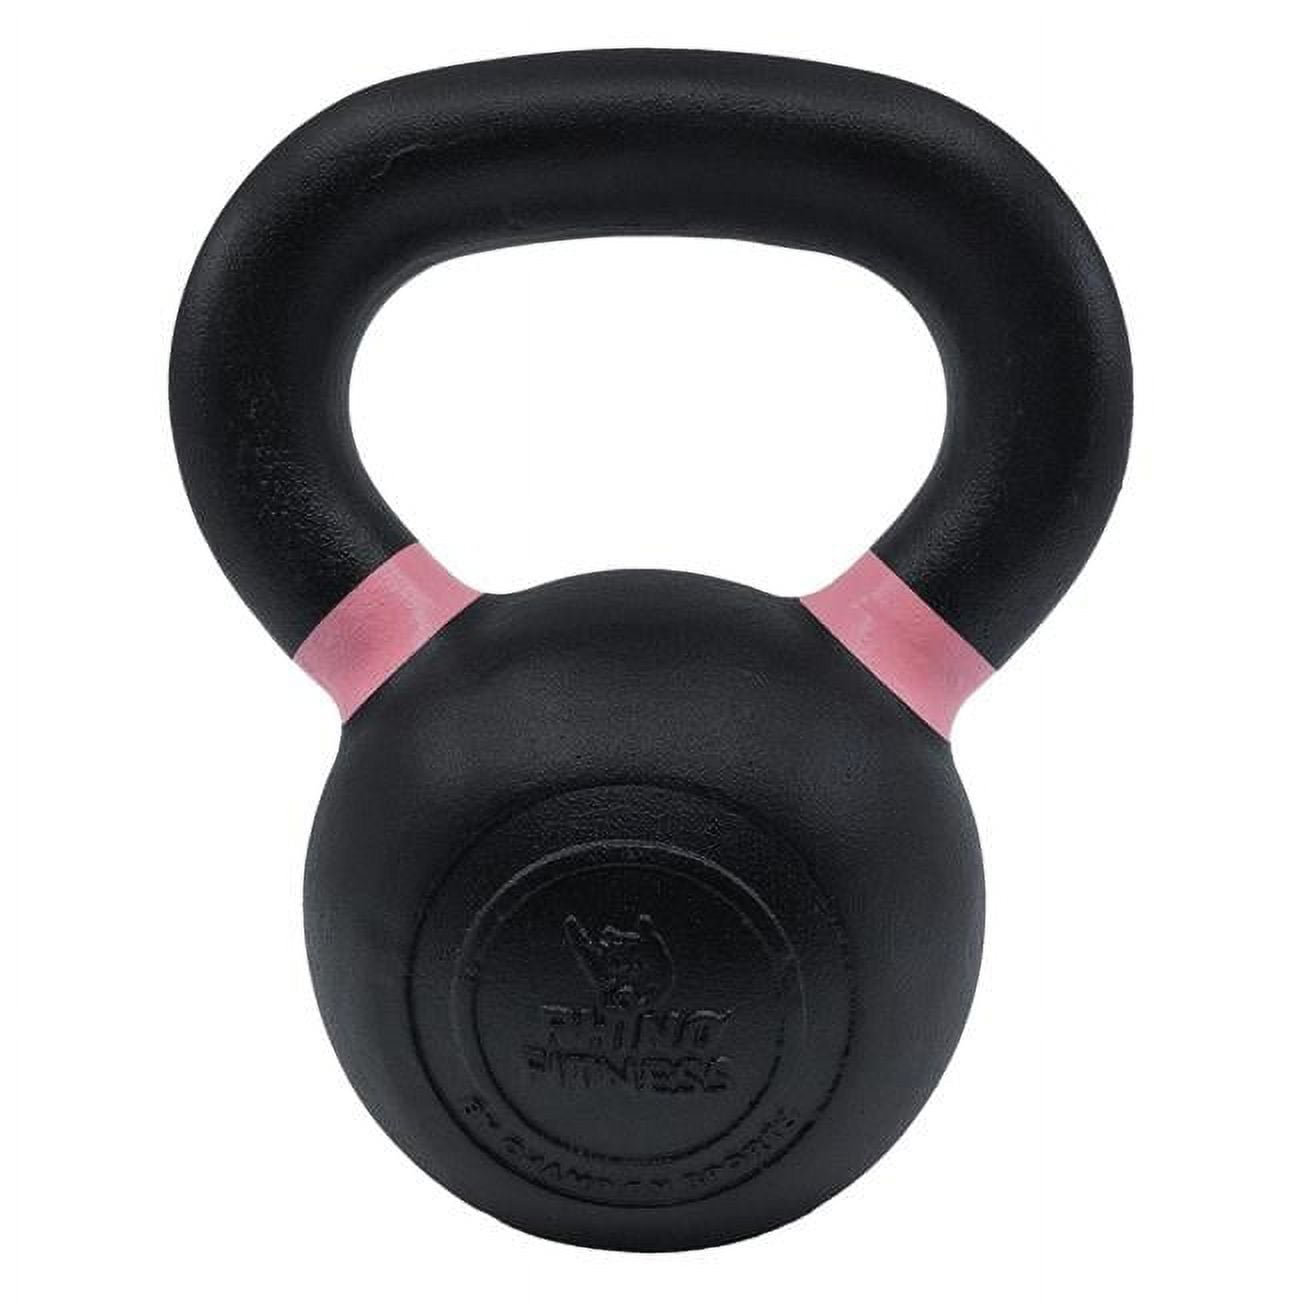 Picture of Champion Sports PCK20 6 x 4 x 8 in. 20 lbs Iron Kettlebell with Pink Handles